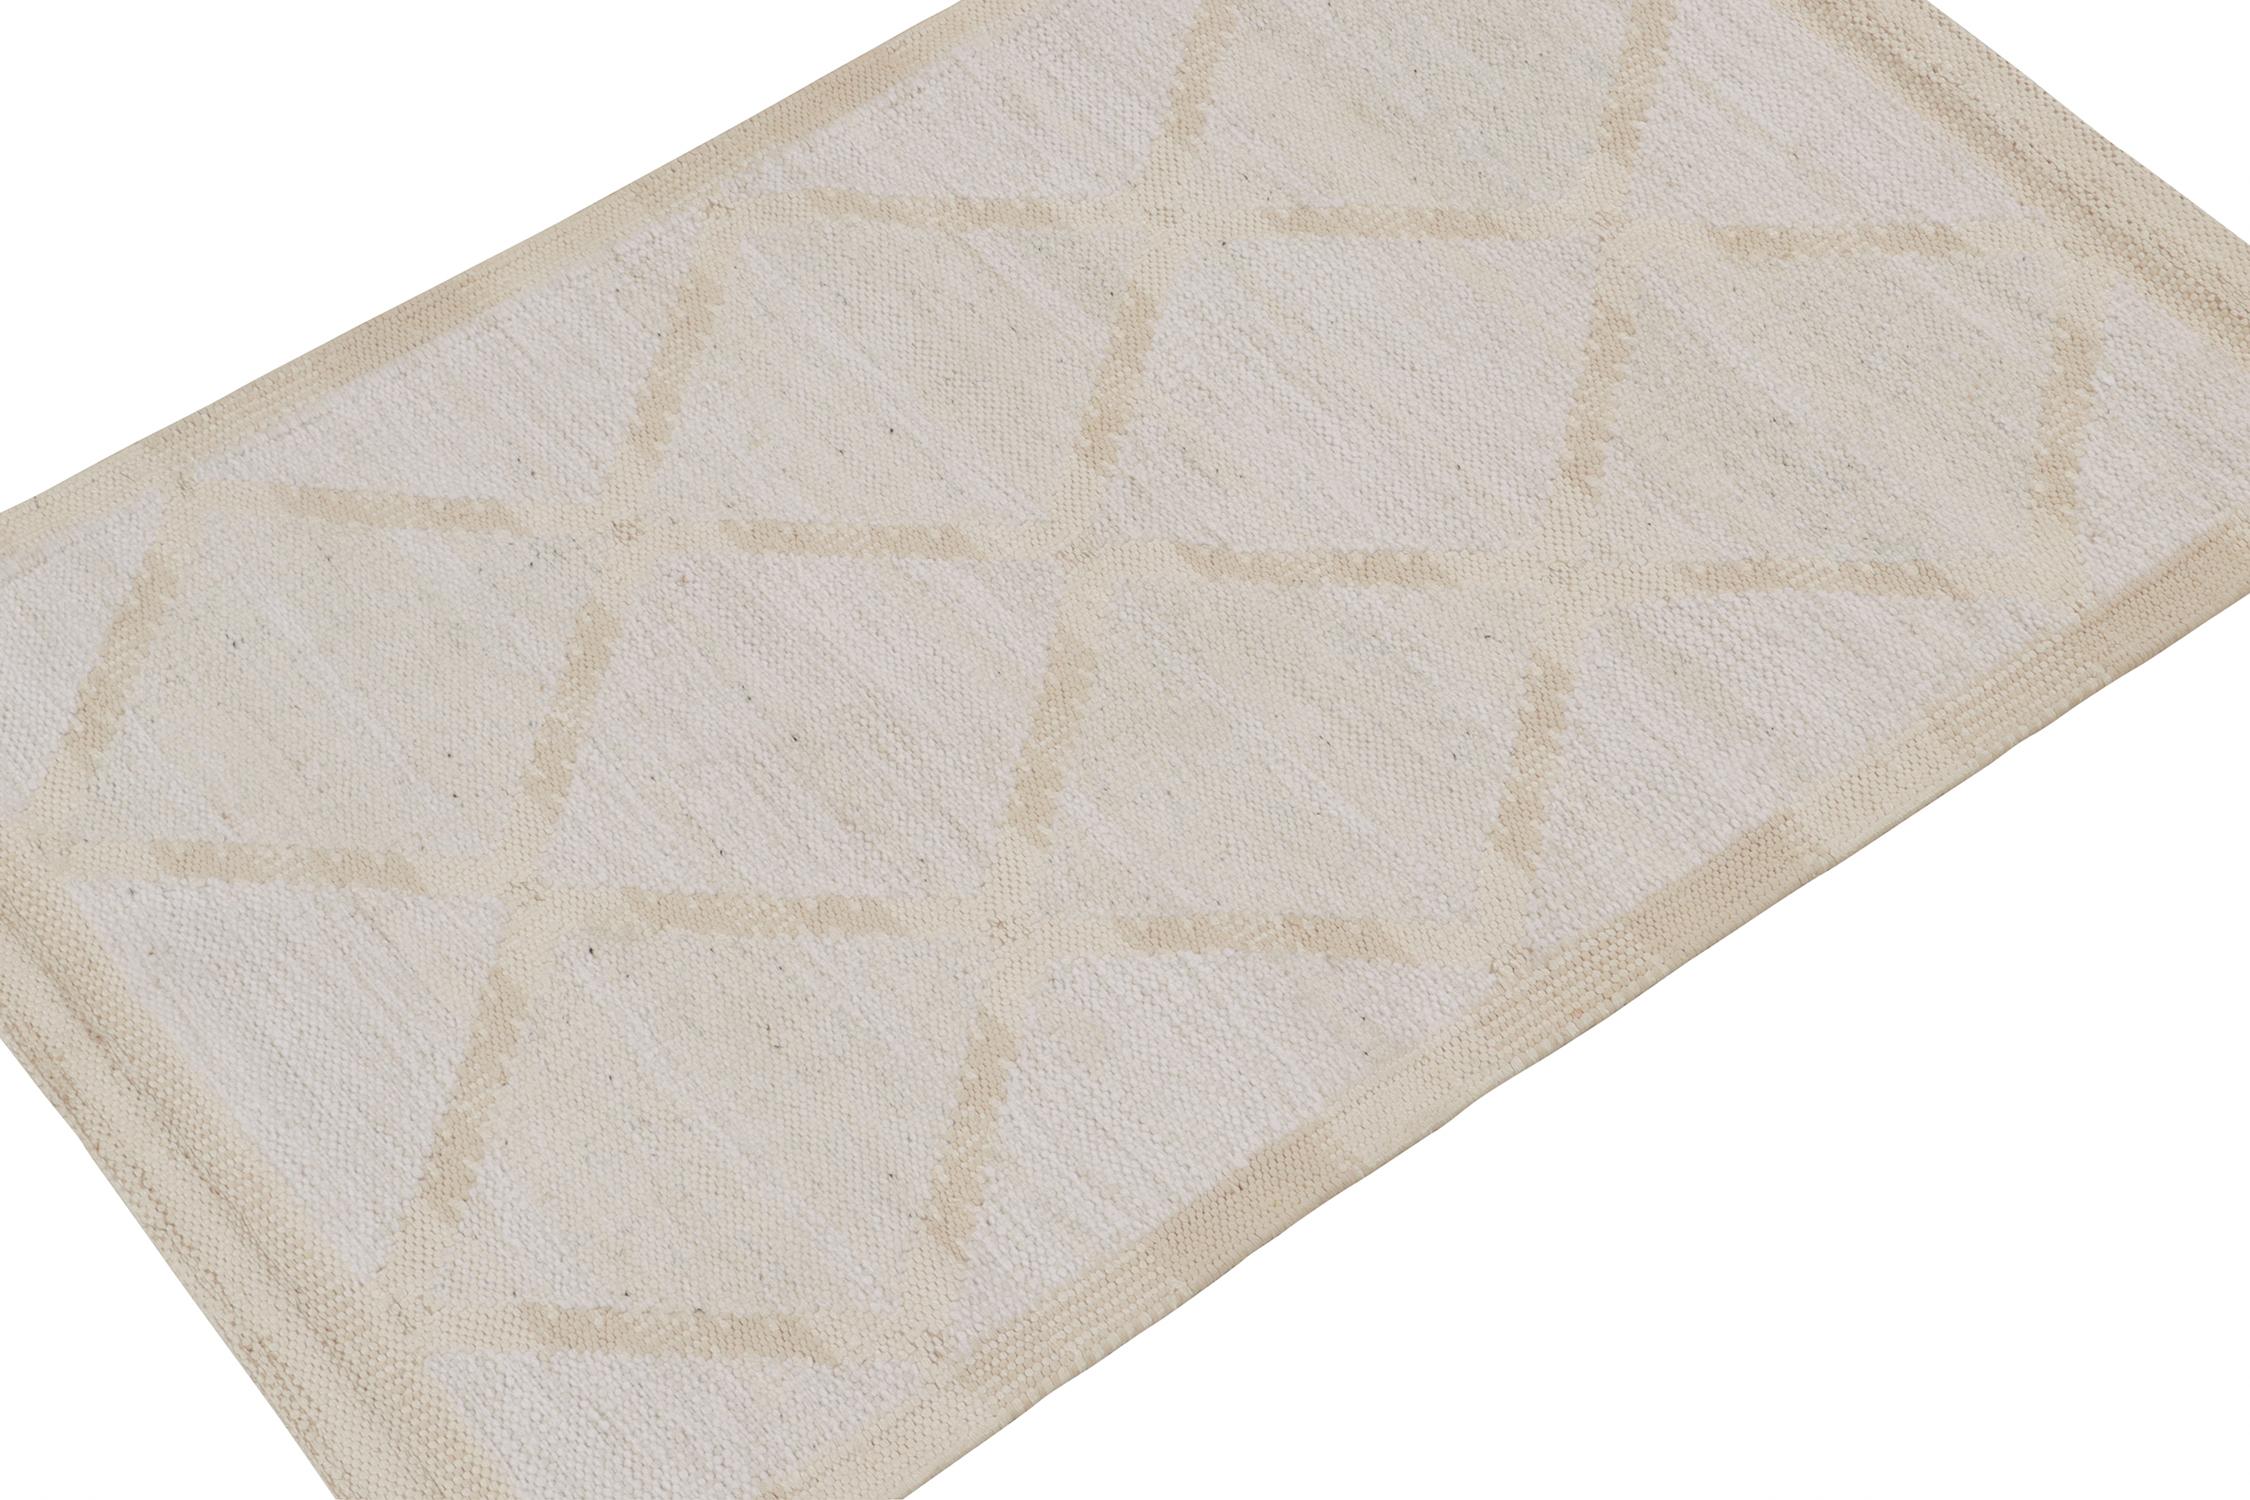 A smart 3x5 Swedish style kilim from Rug & Kilim’s award-winning Scandinavian flat weave collection. Handwoven in wool. 
On the Design: 
This rug enjoys a gorgeous natural movement with elegant diamond lattice patterns in bright white and beige